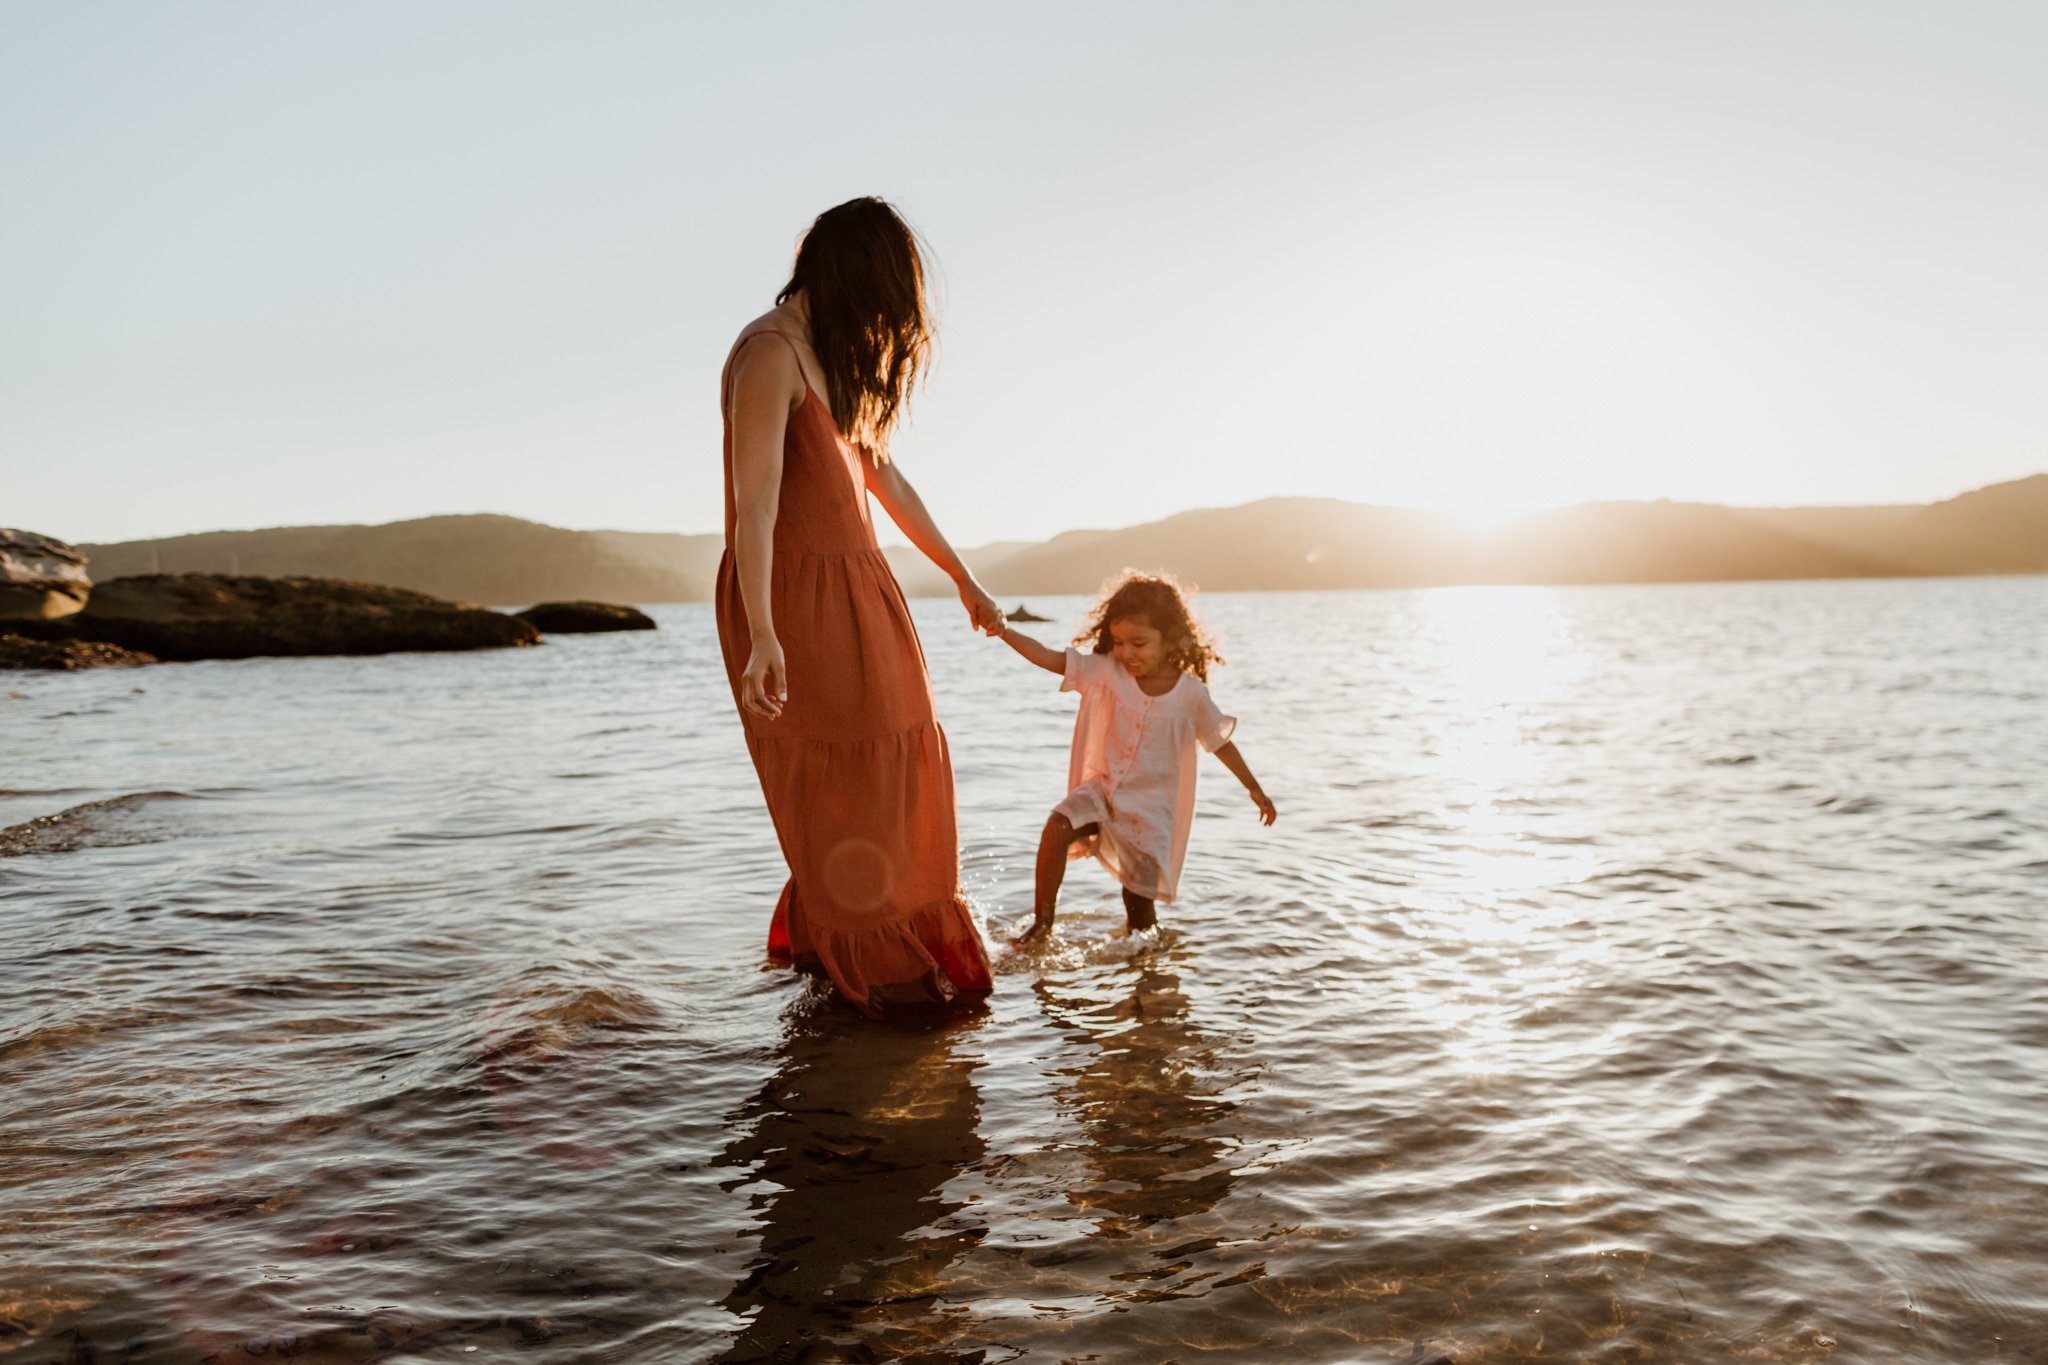 Mother & daughter playing in a body of water with the sun gleaming in the background